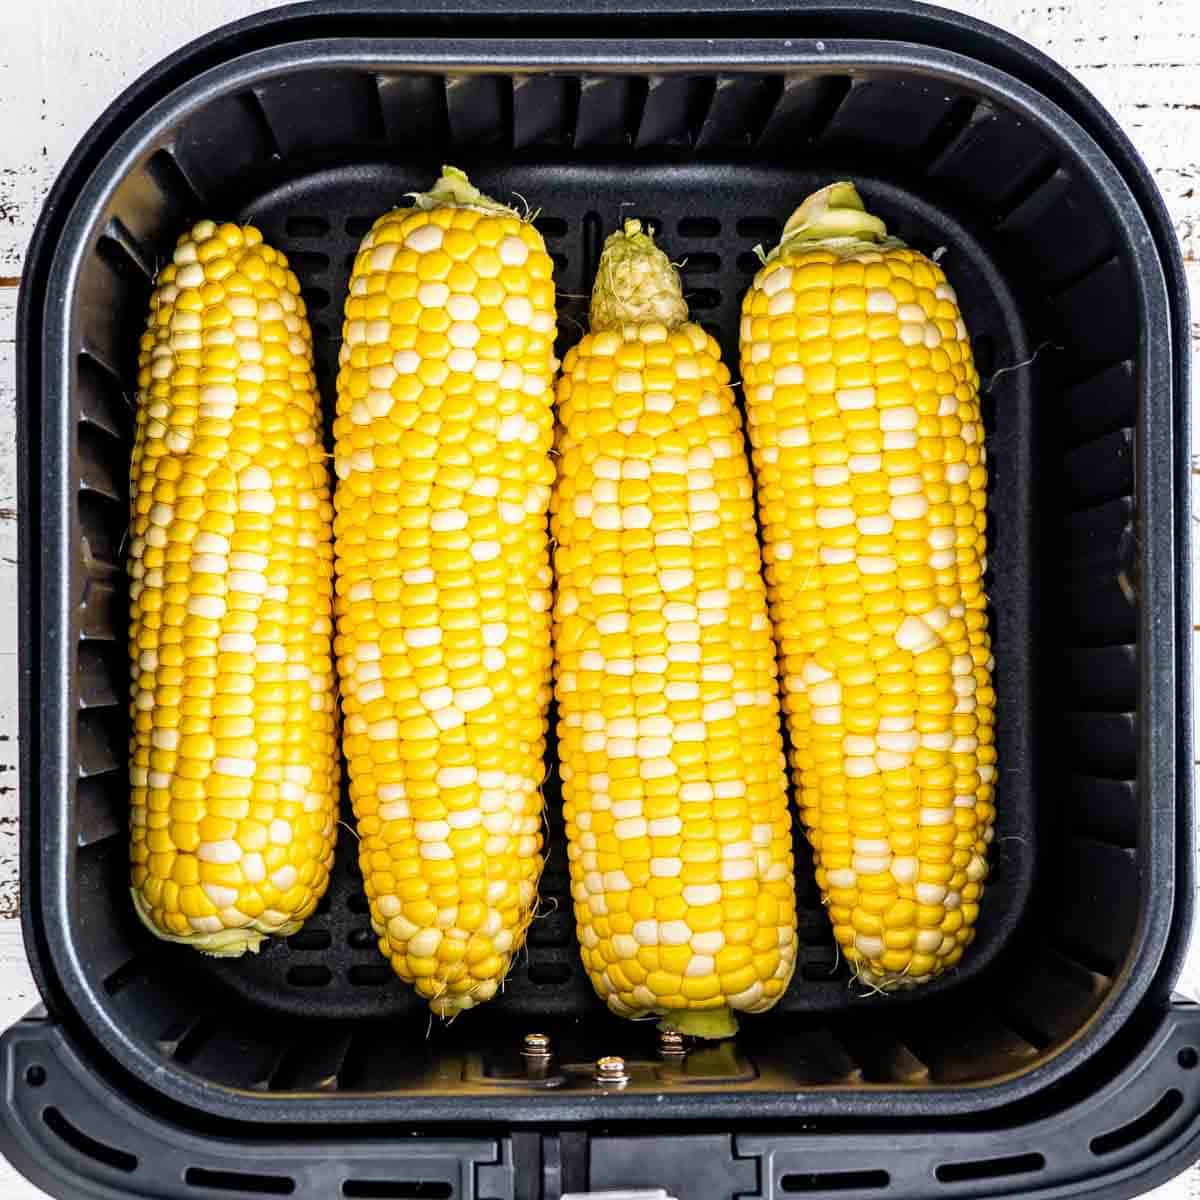 corn on the cob in an air fryer basket.